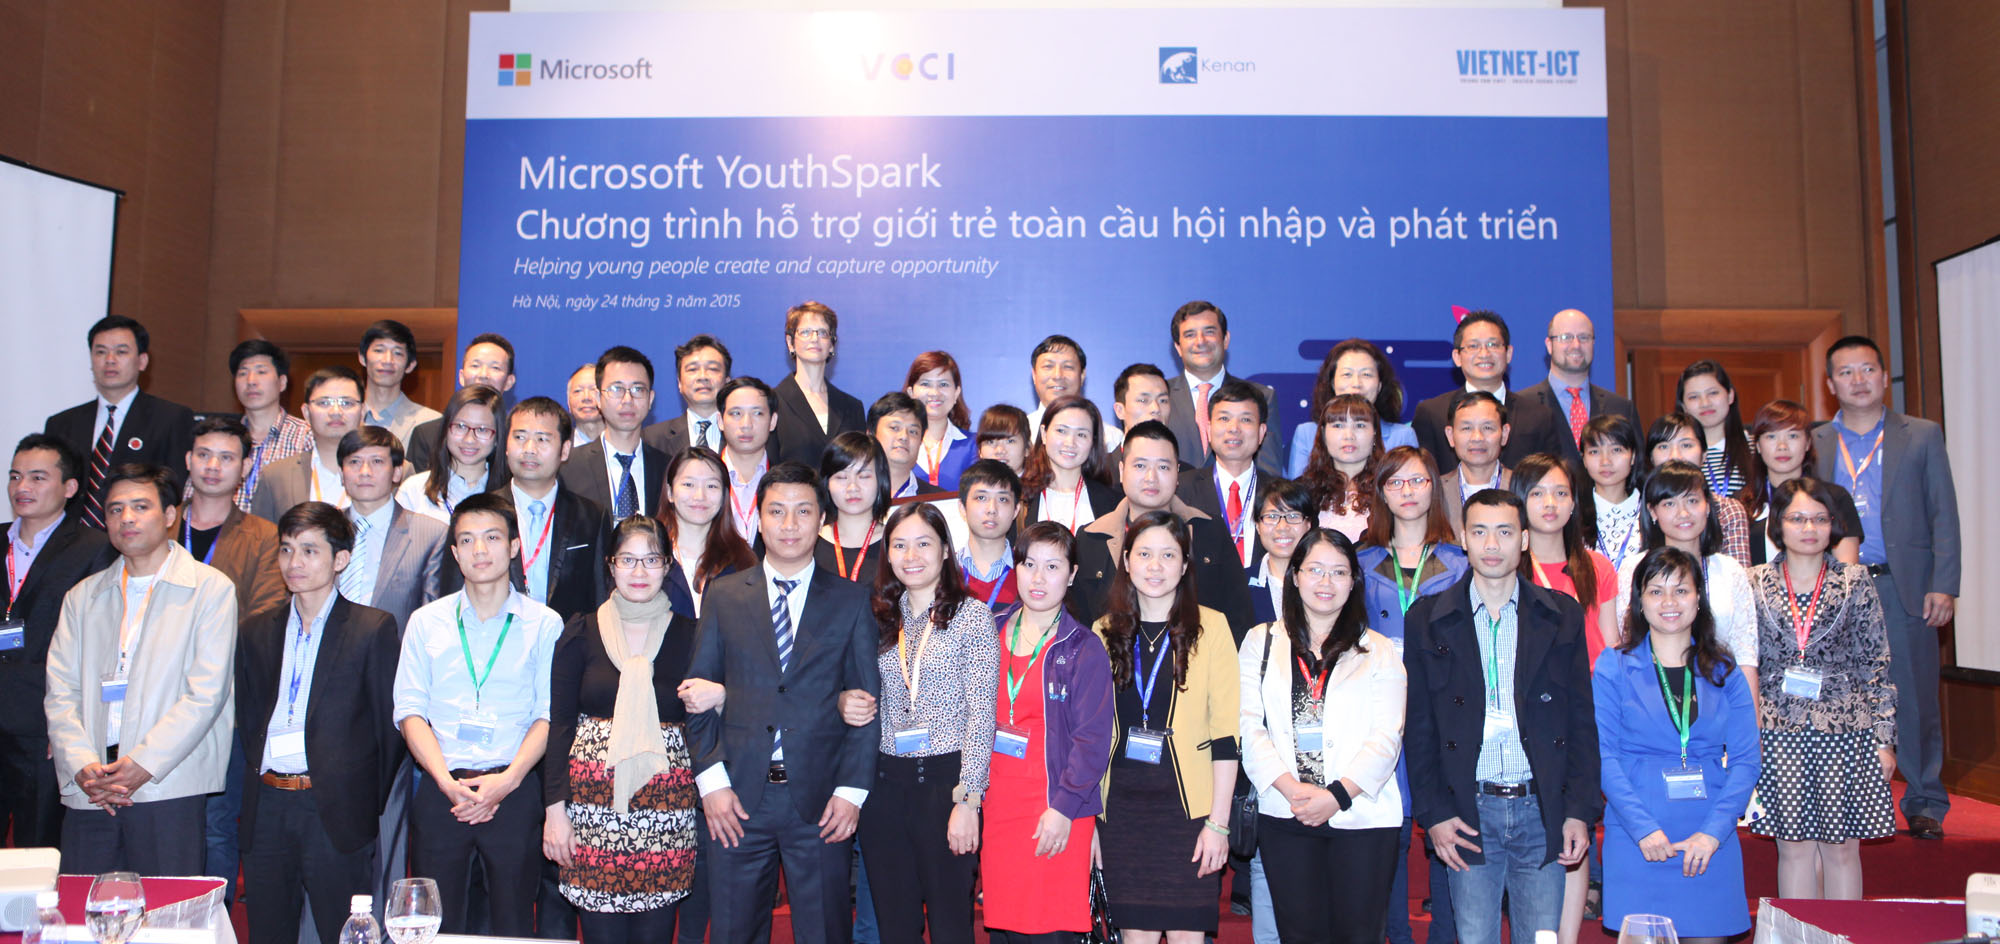 Microsoft announces $3mn YouthSpark investment in Vietnam